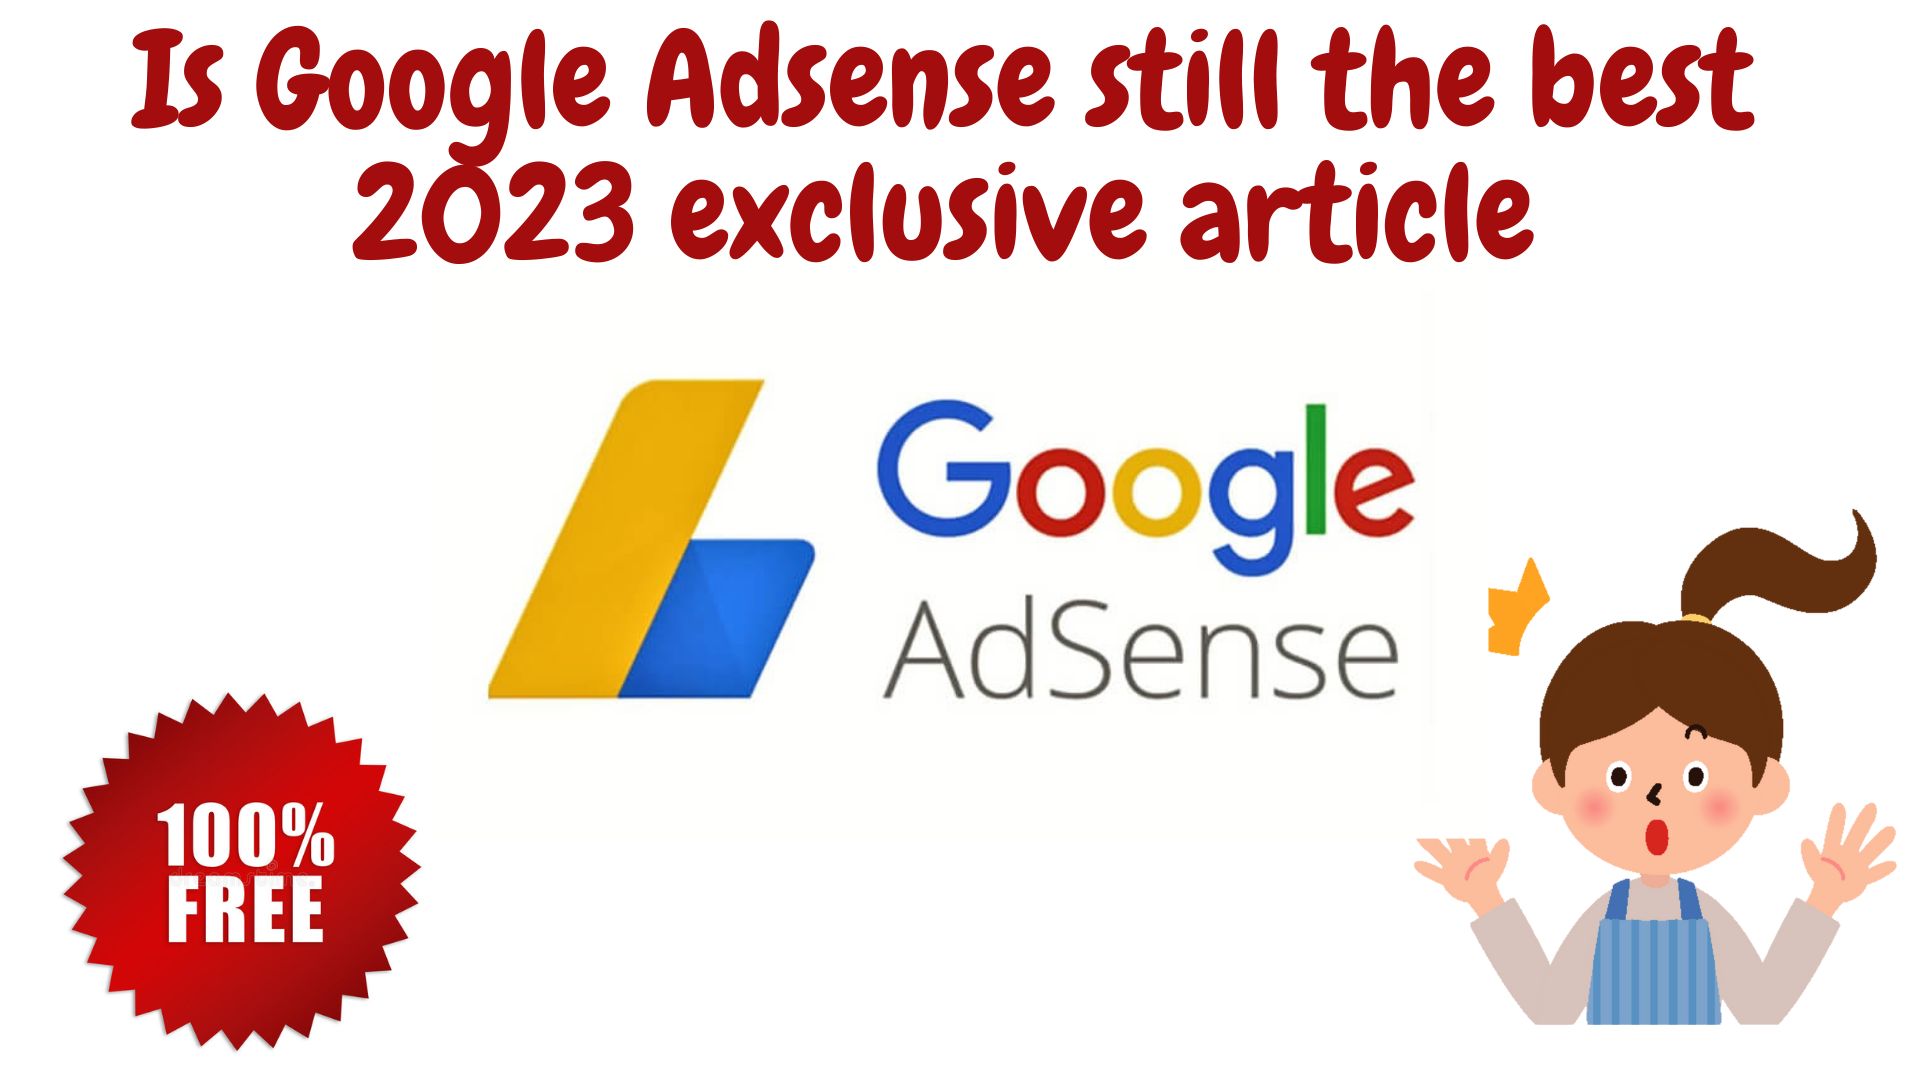 Is google adsense still the best 2023 exclusive article